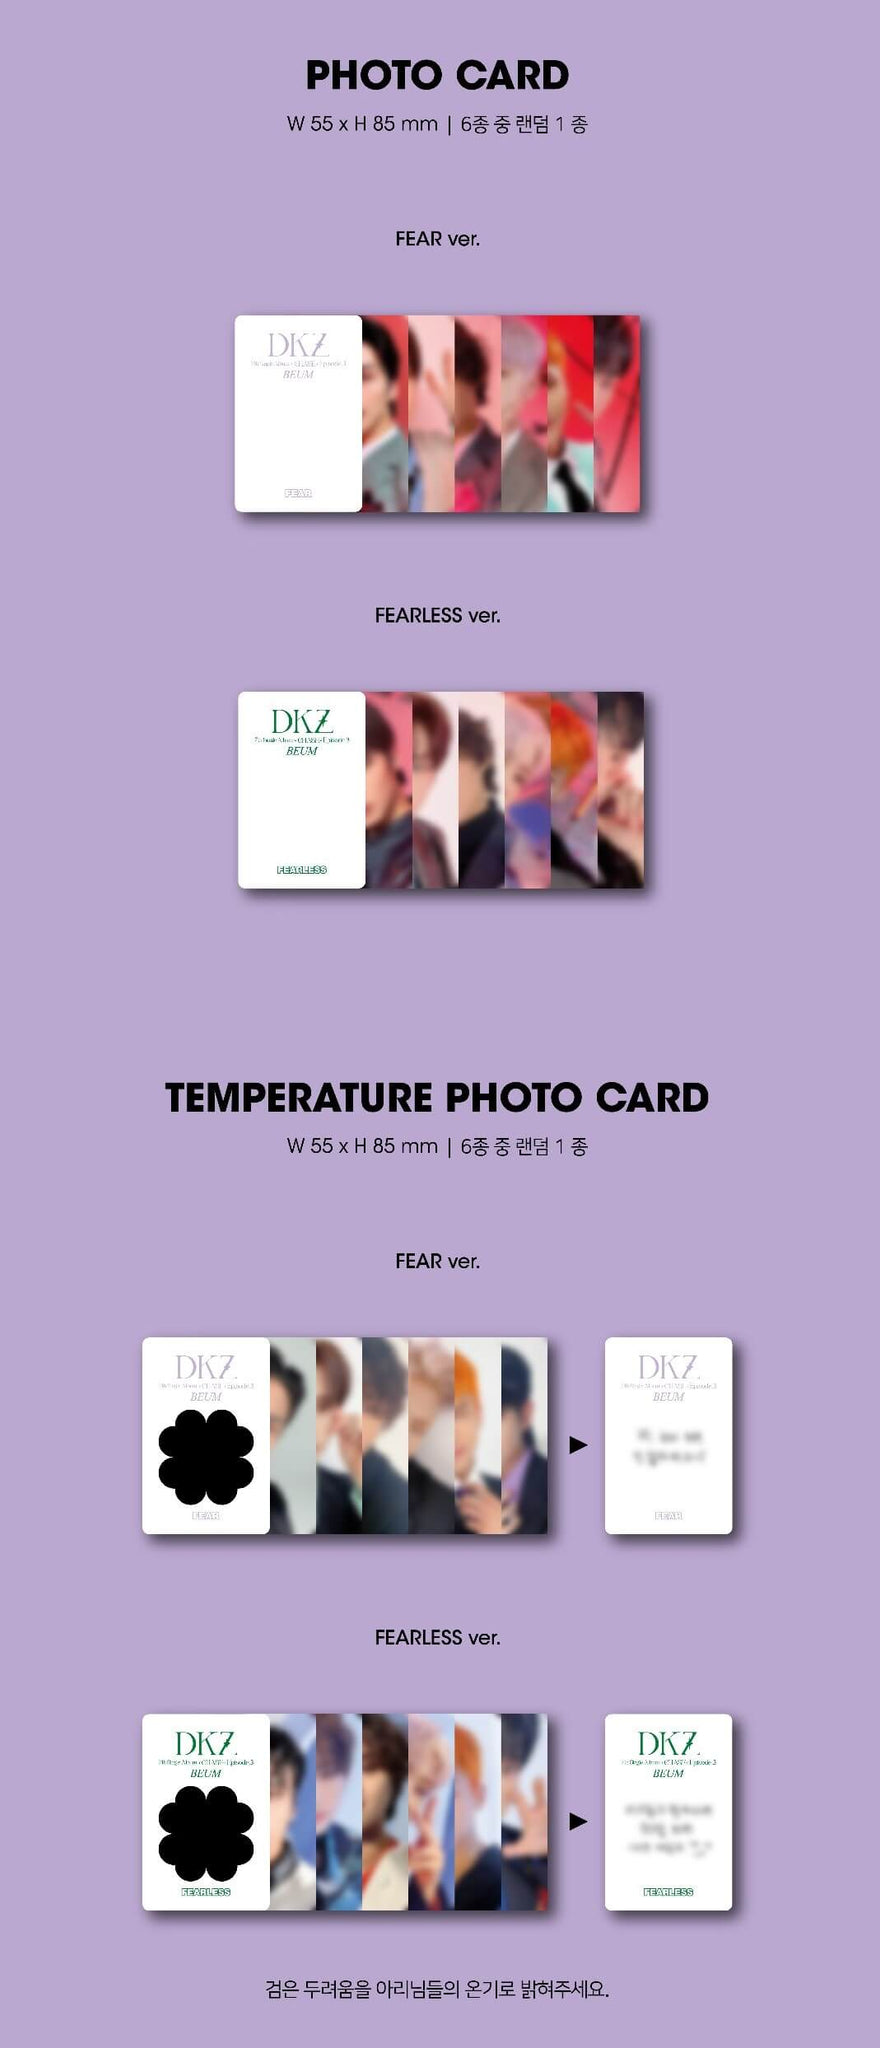 DKZ CHASE EPISODE 3. BEUM Inclusions Photocard Temperature Photocard